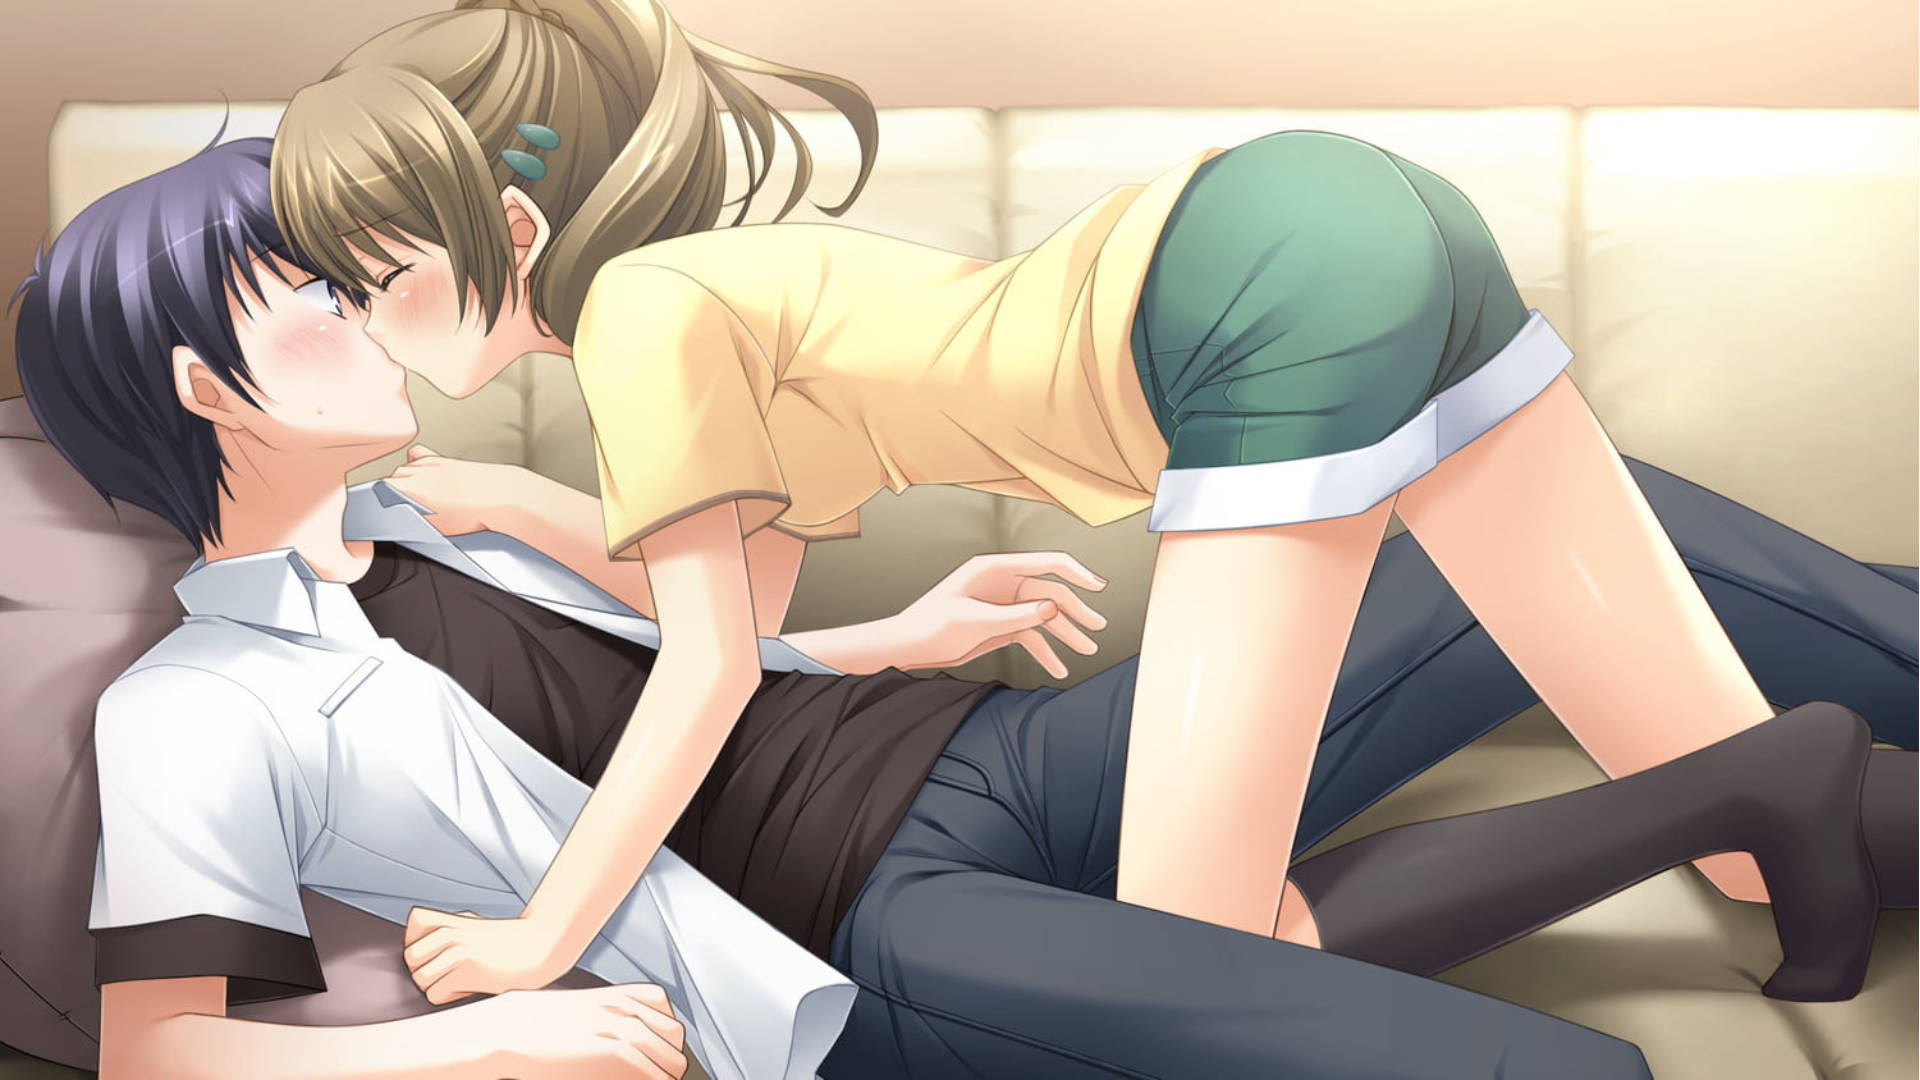 Anime Couple Kiss On A Couch Wallpaper